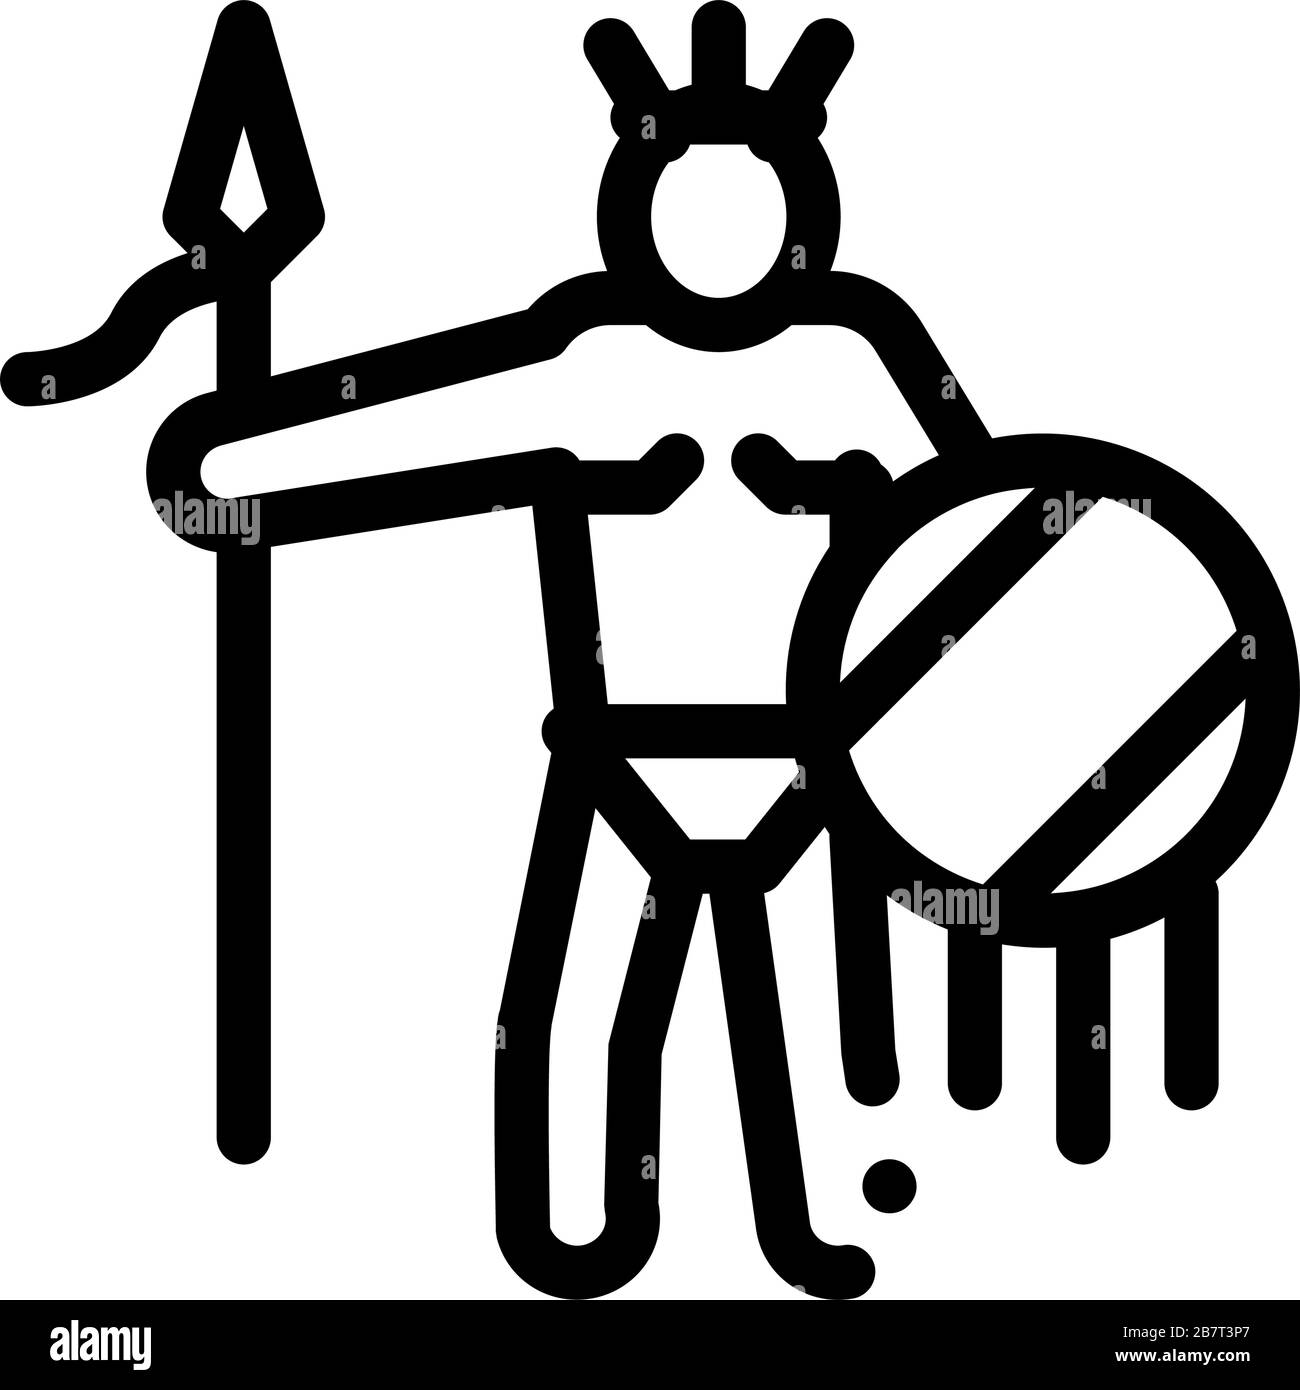 Aztec with Spear and Shield Outline Illustration Stock Vector